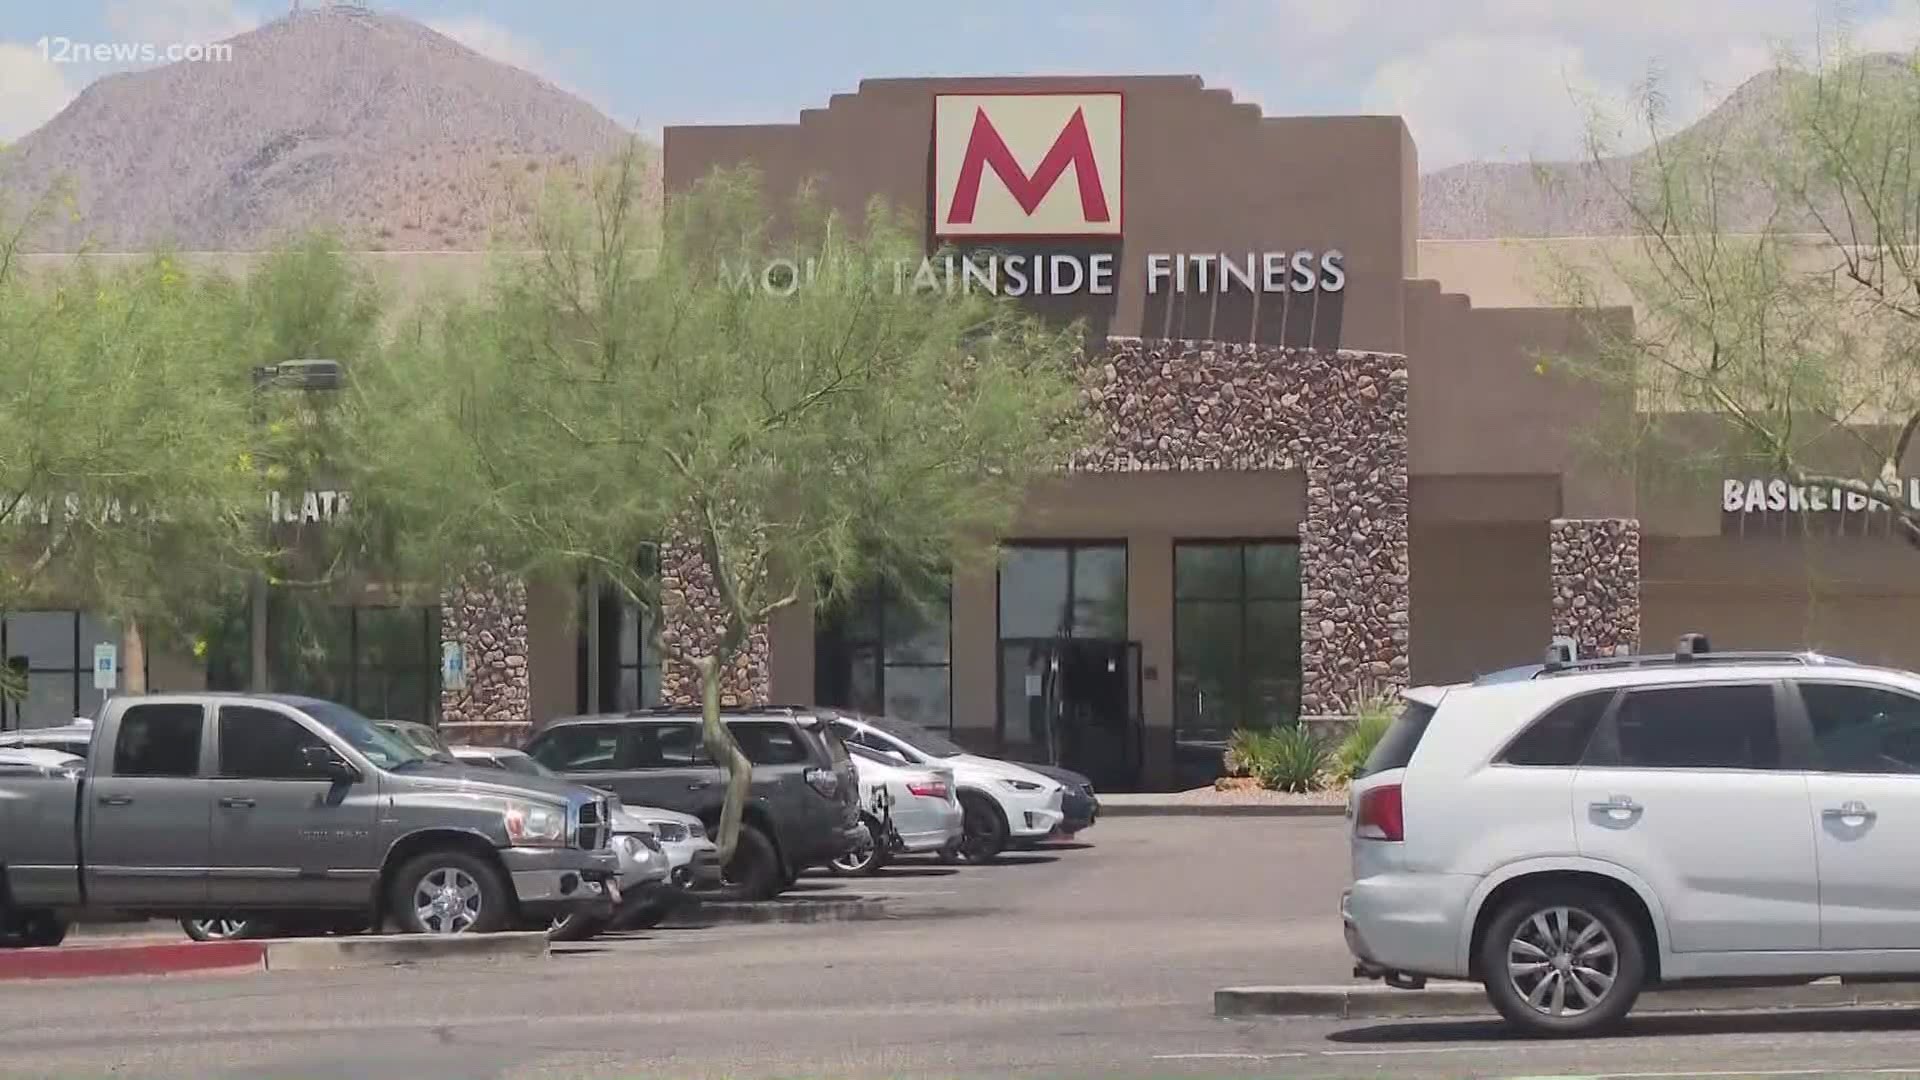 Mountainside Fitness reopens Thursday after getting denied by Arizona to do so